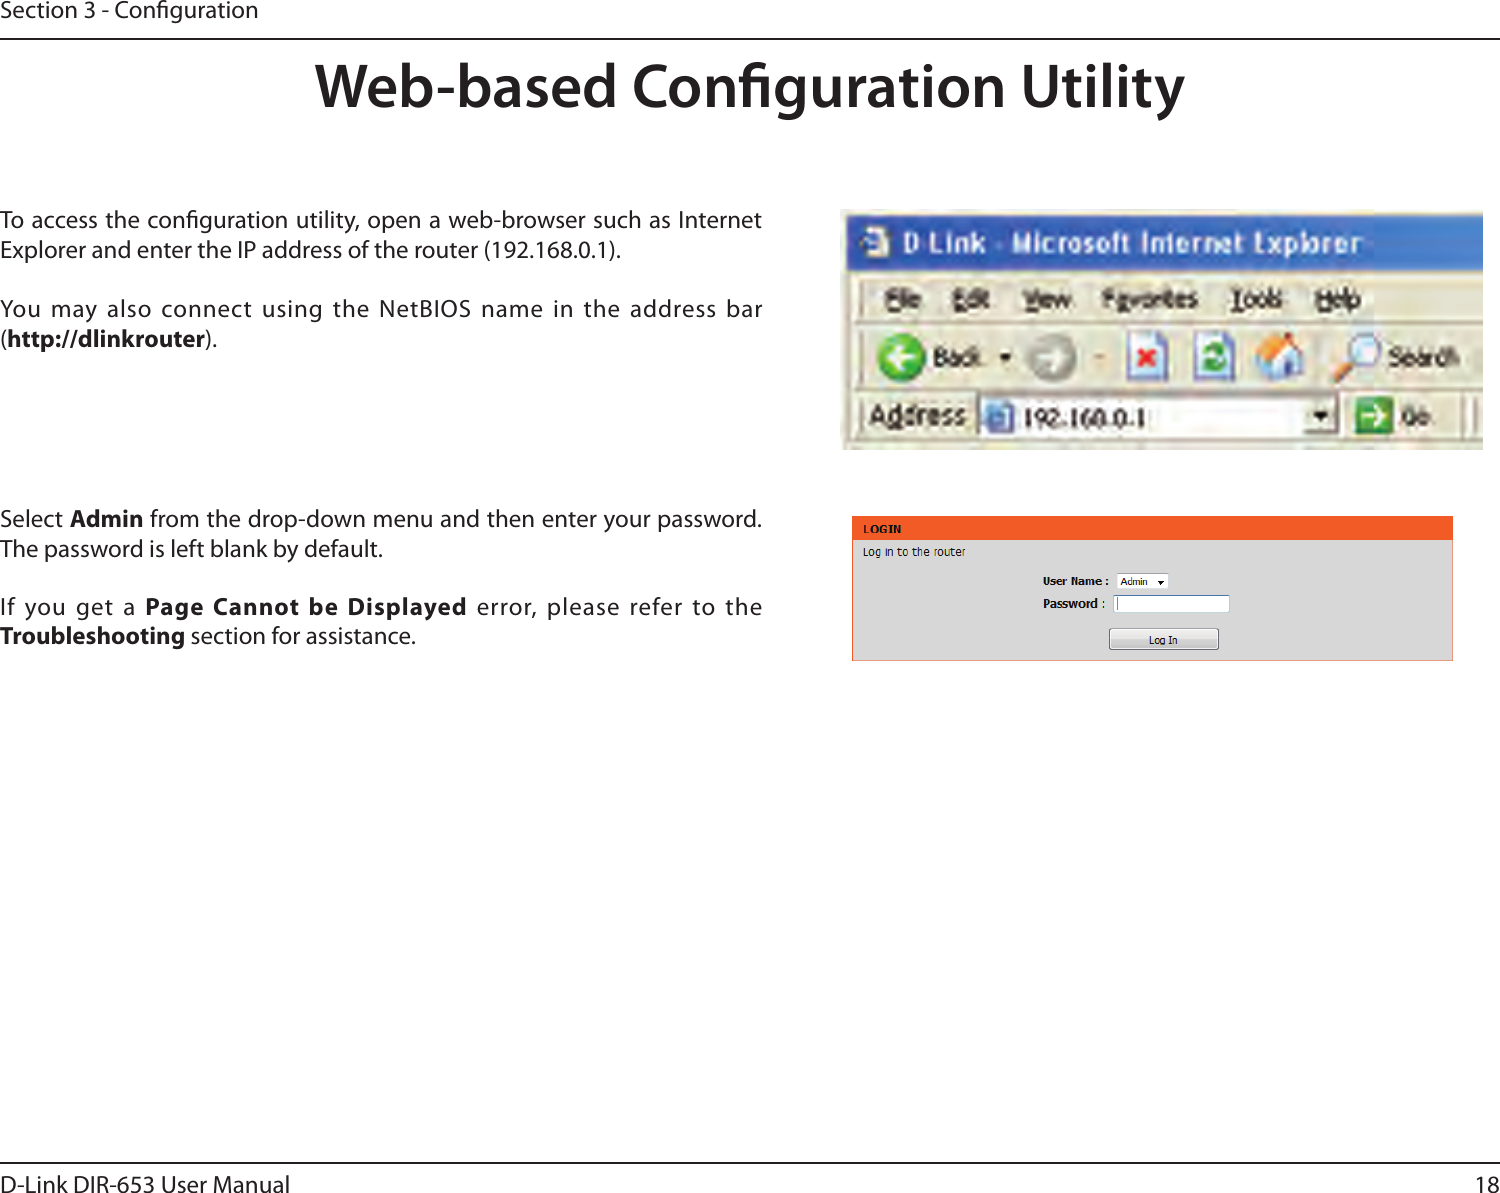 18D-Link DIR-653 User ManualSection 3 - CongurationWeb-based Conguration UtilityTo access the conguration utility, open a web-browser such as Internet Explorer and enter the IP address of the router (192.168.0.1).You  may also  connect using the  NetBIOS name in  the address bar (http://dlinkrouter).Select Admin from the drop-down menu and then enter your password. The password is left blank by default.If  you  get  a  Page  Cannot  be  Displayed  error,  please  refer  to  the Troubleshooting section for assistance.